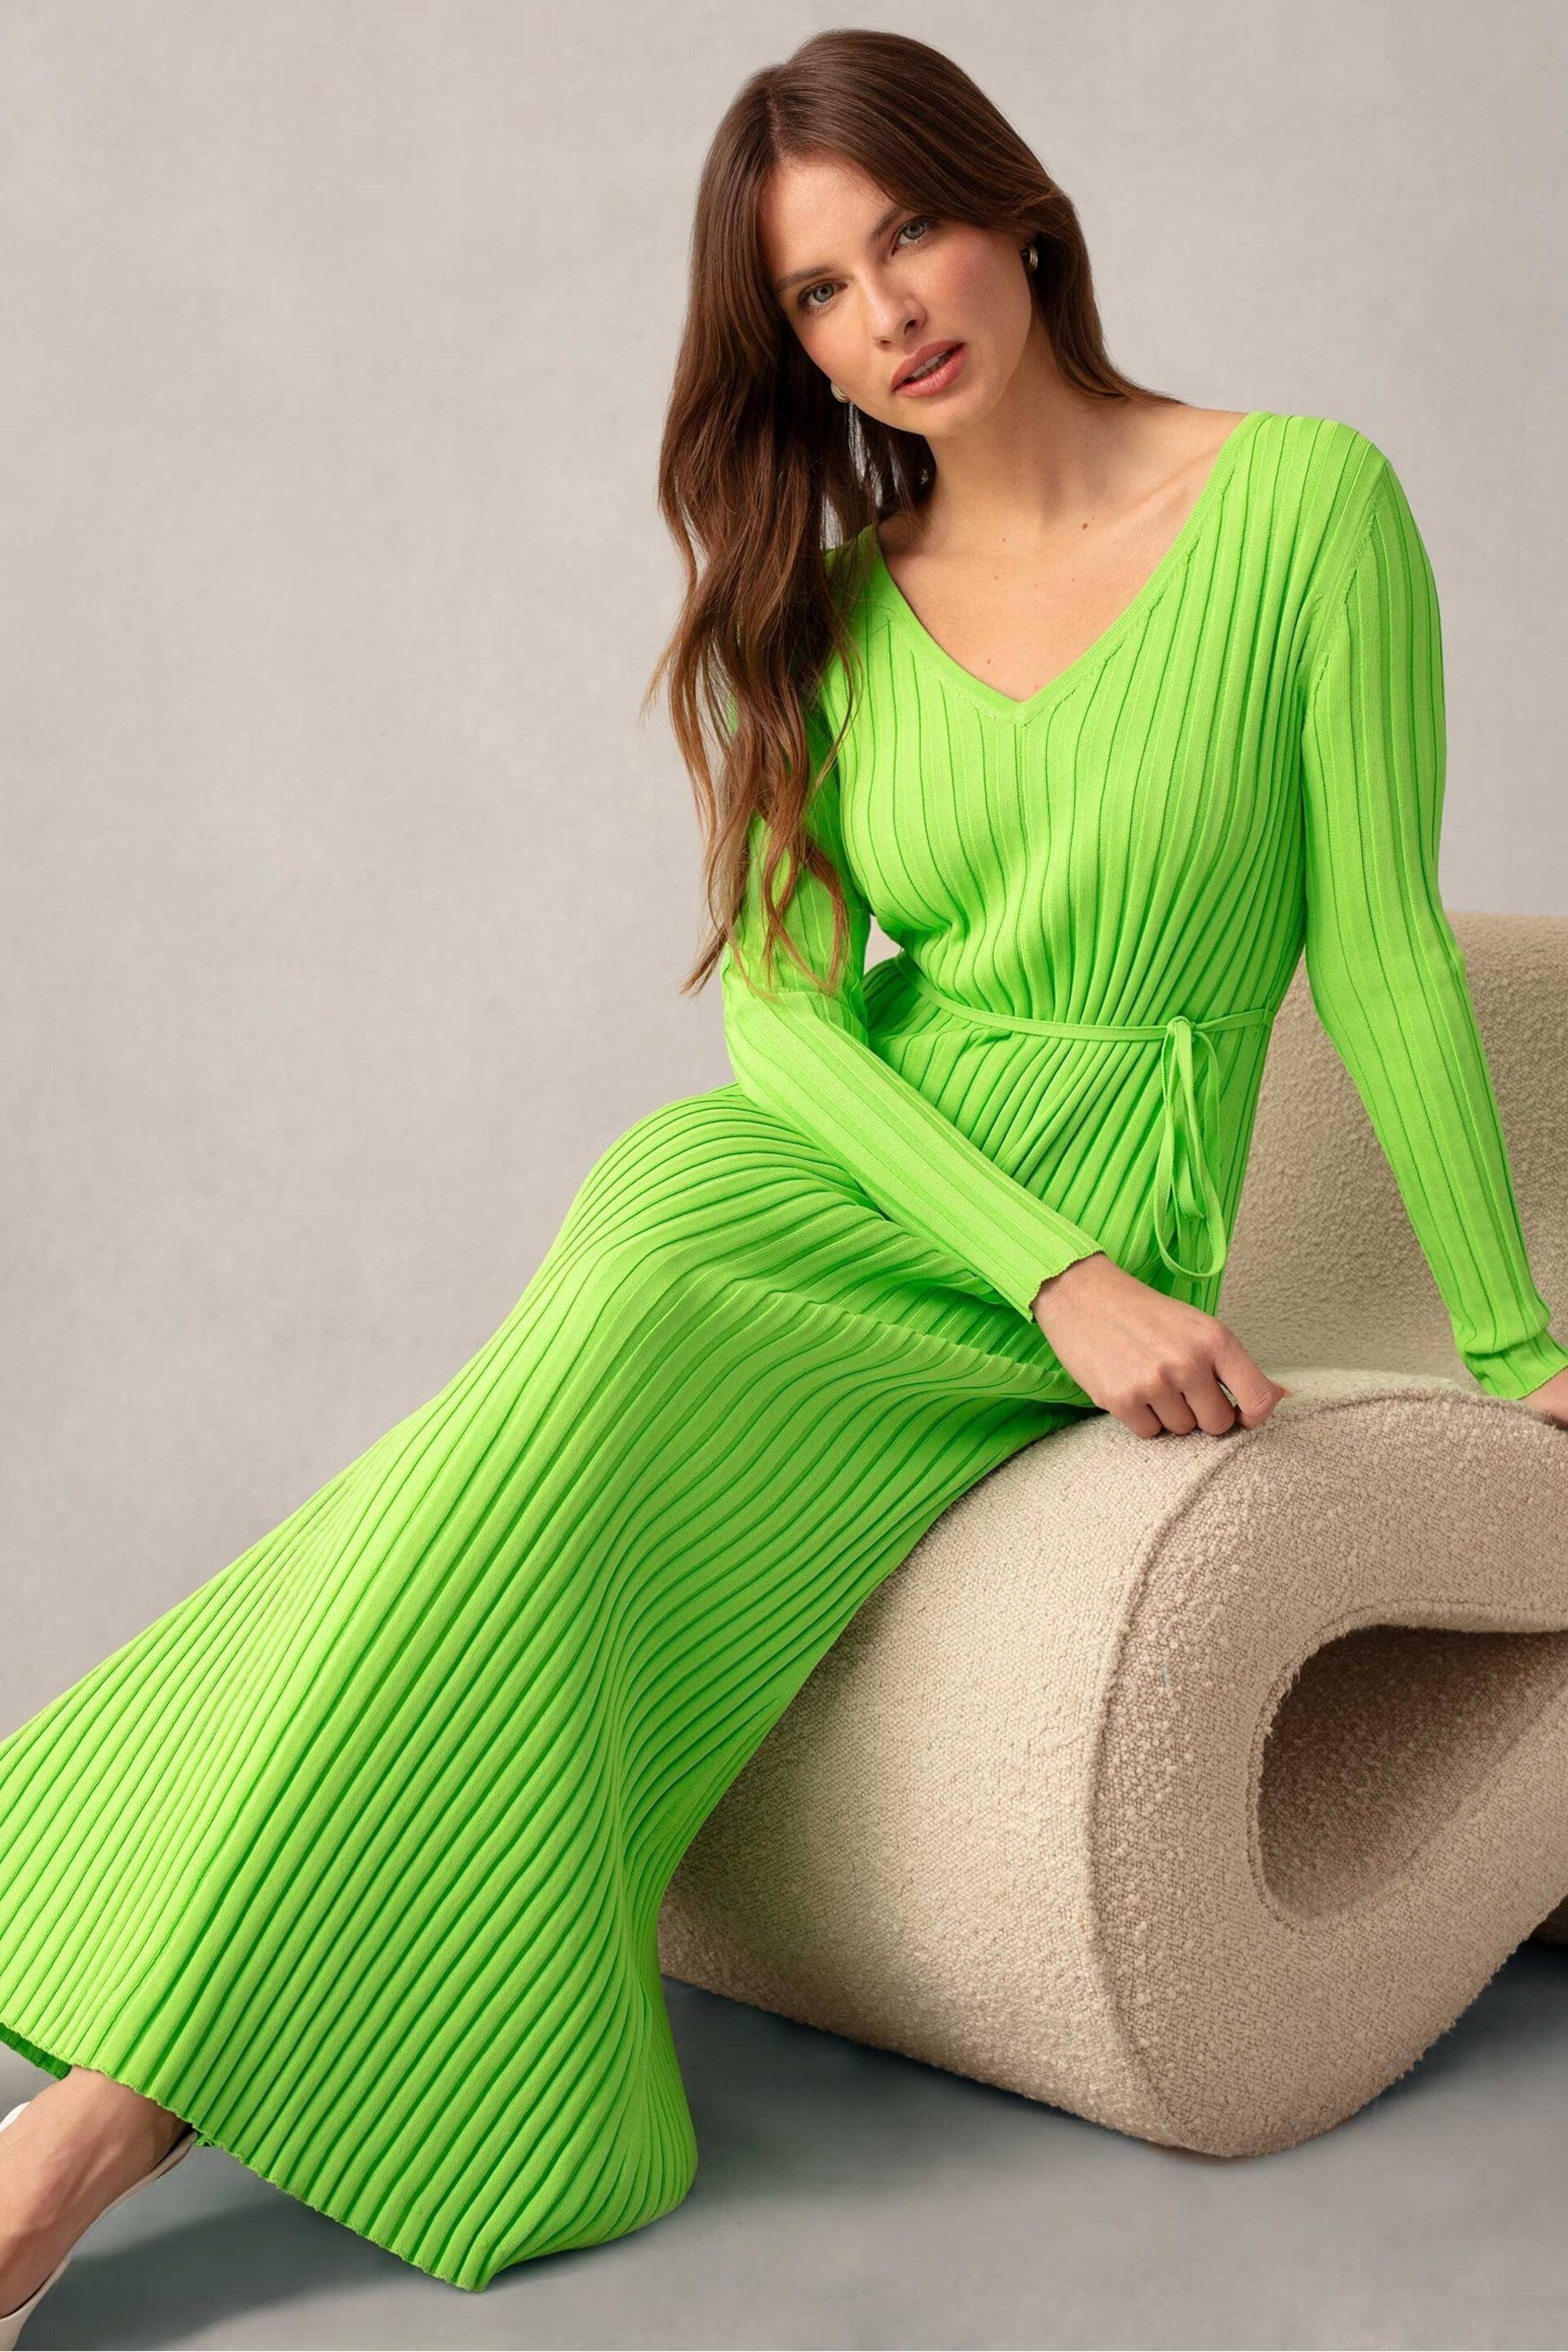 Ro&Zo Green Lime Wide Rib Knit V-Neck Dress - Image 3 of 6